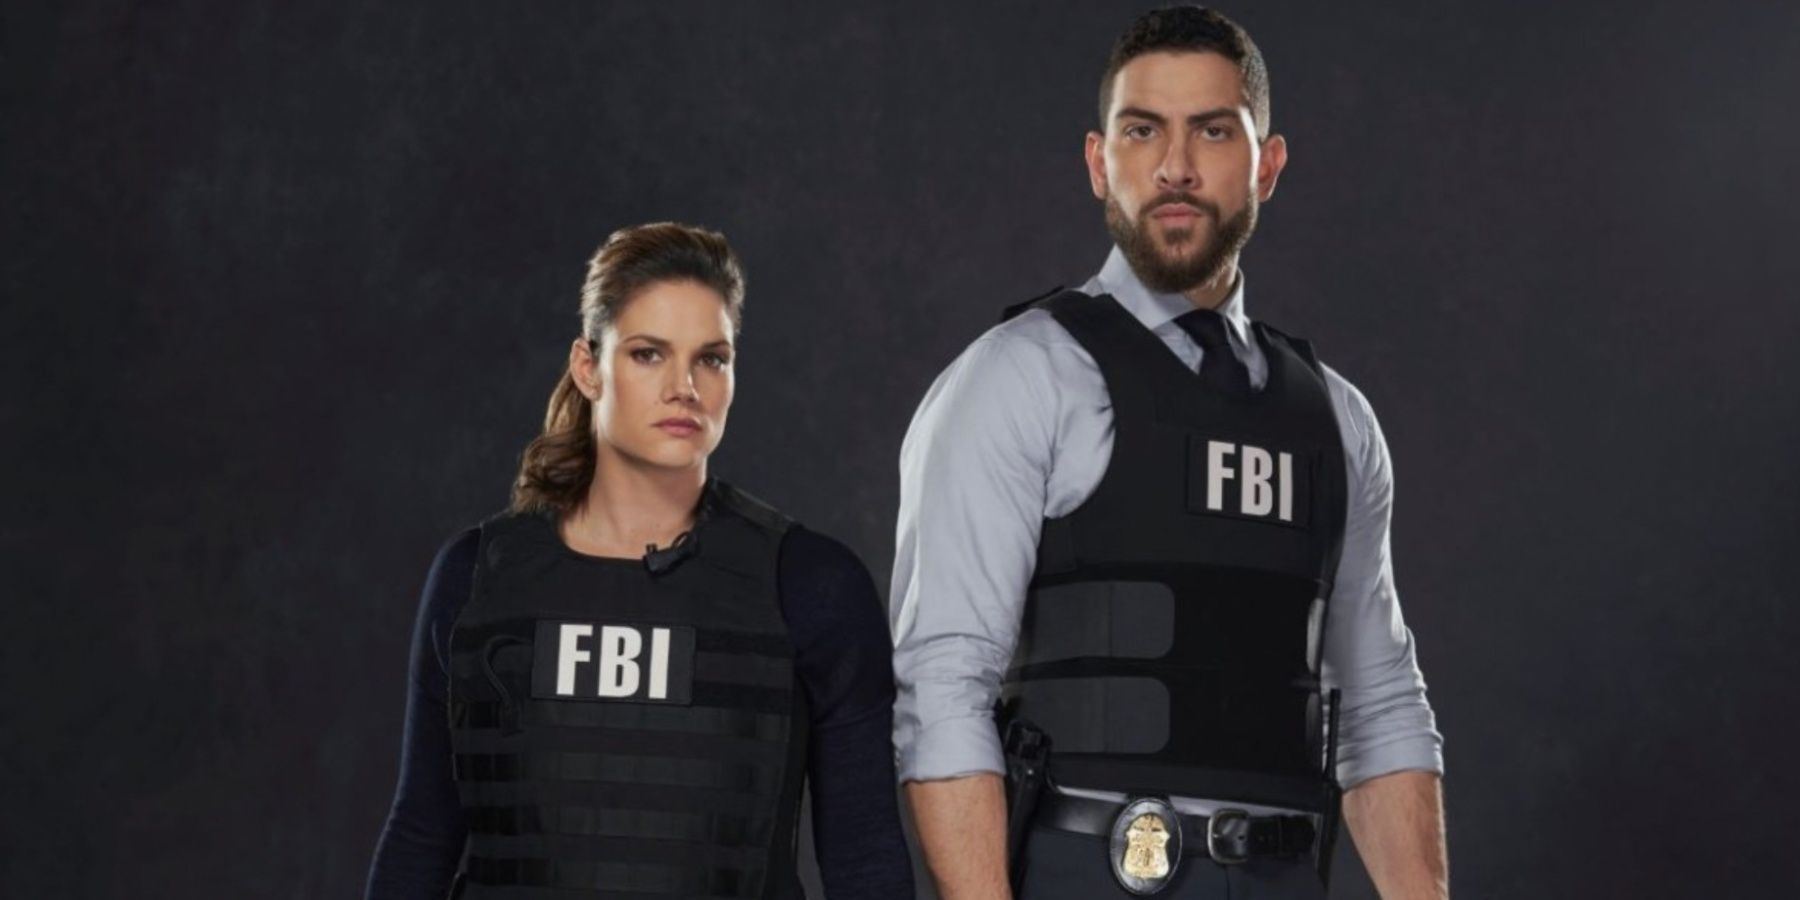 FBI Season 6: Release Date, Cast, Story & Everything We Know